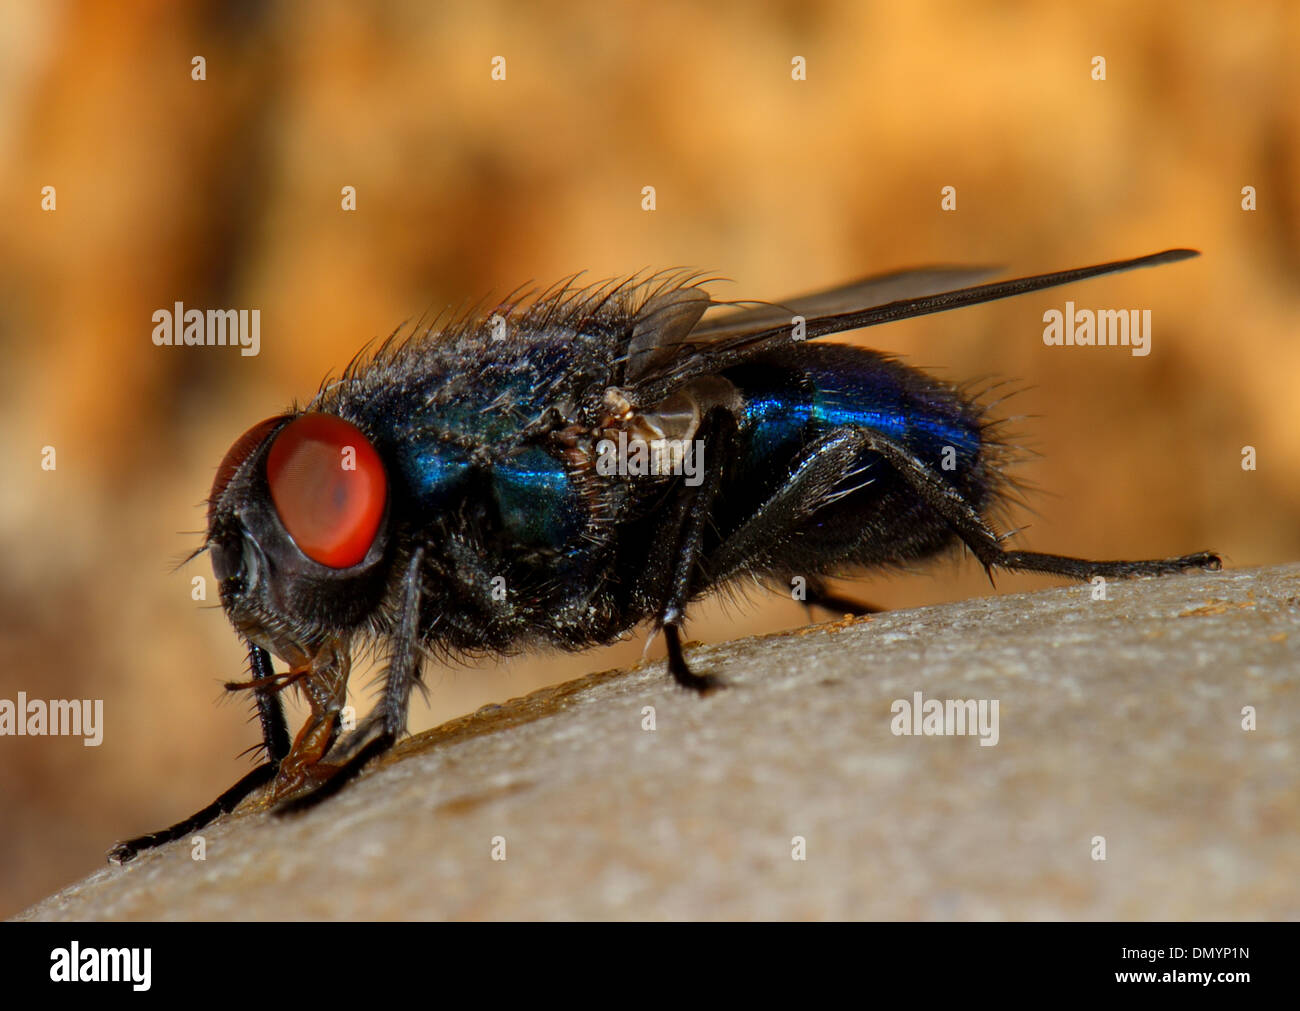 Close up of a Common bluebottle or blowfly,Calliphora vomitoria Stock Photo